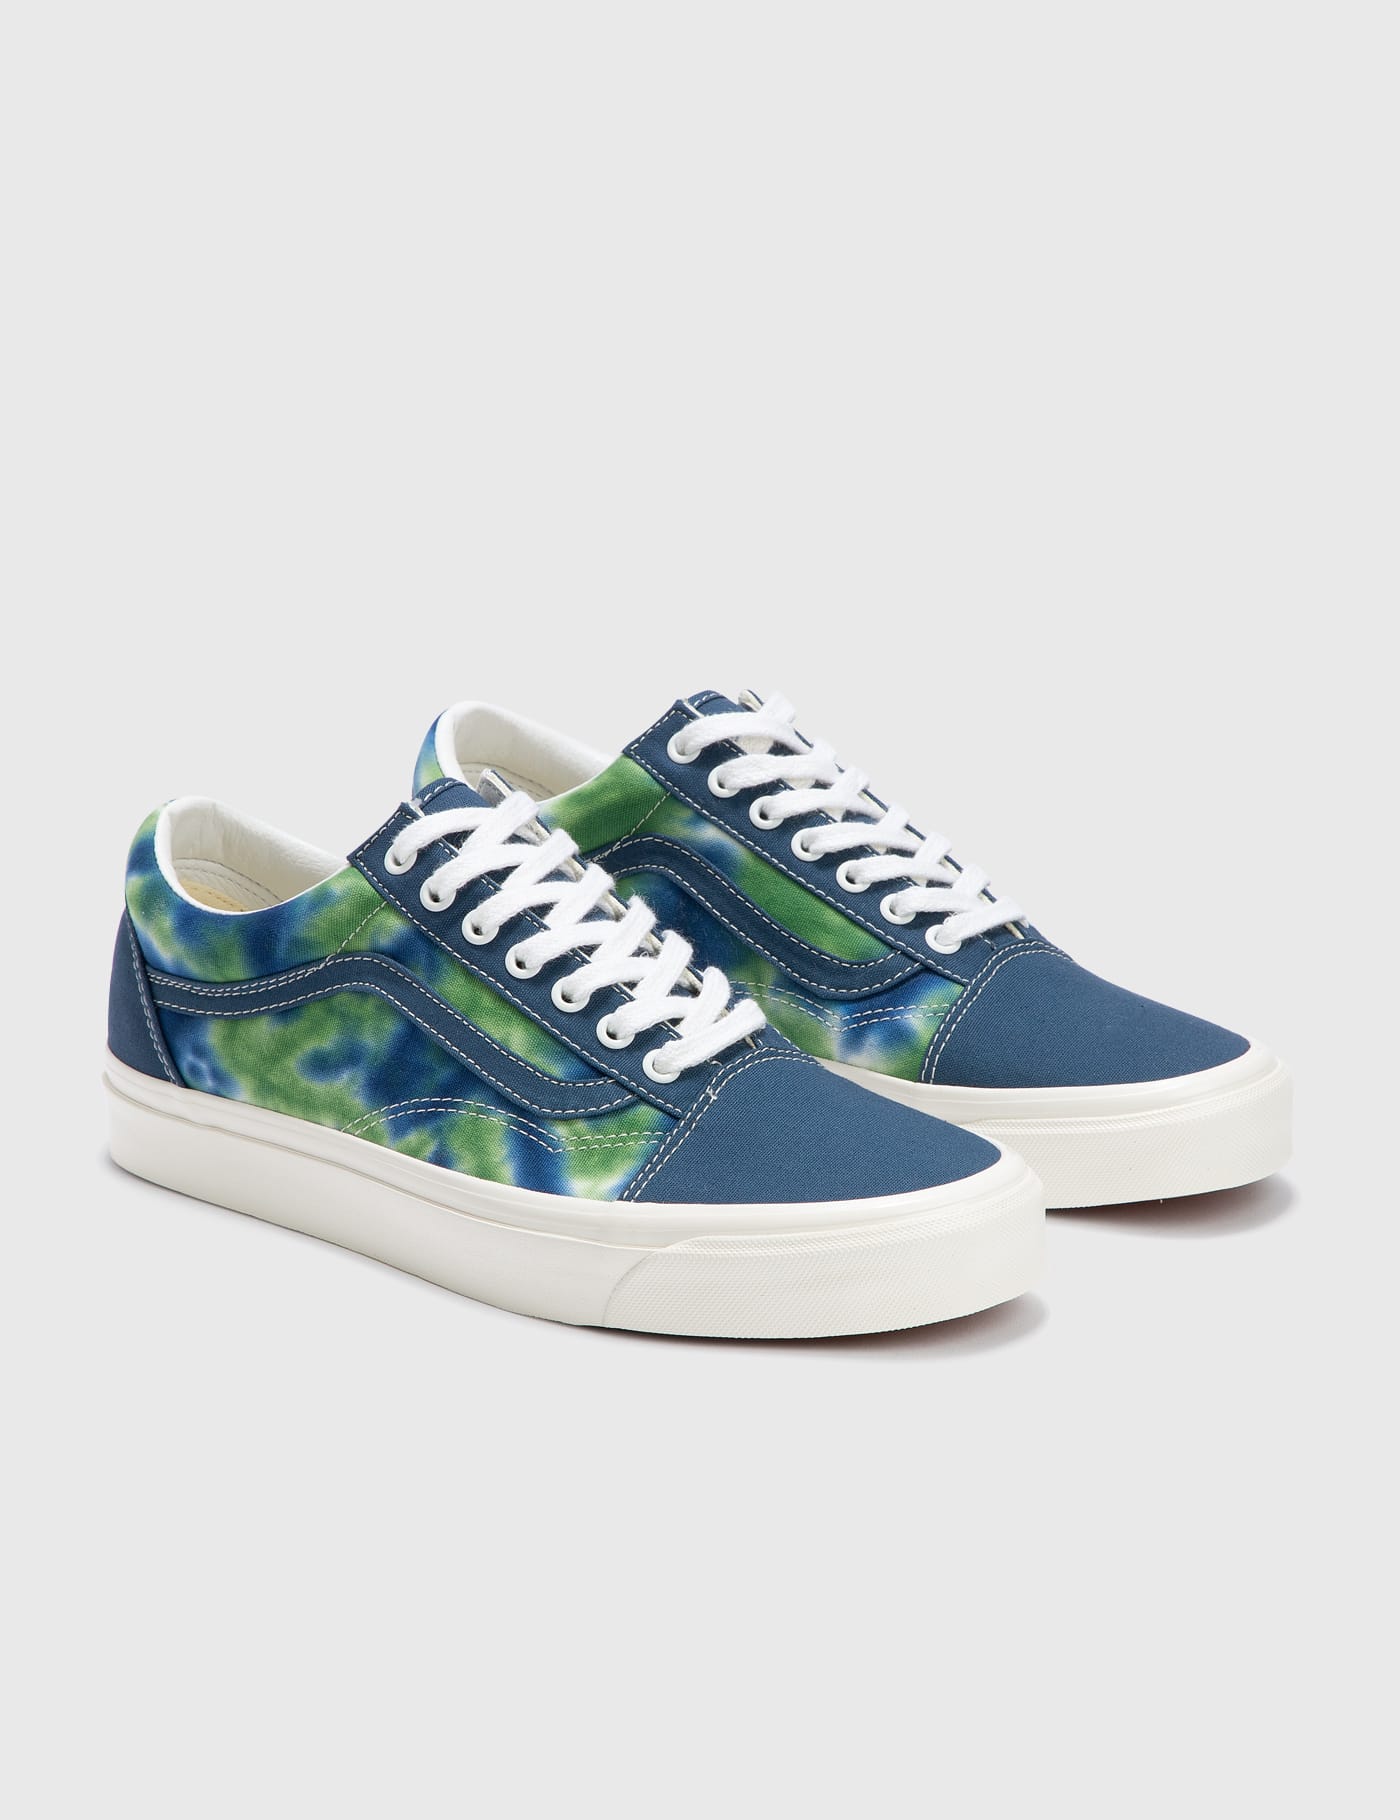 Vans - Anaheim Factory Old Skool 36 DX | HBX - Globally Curated